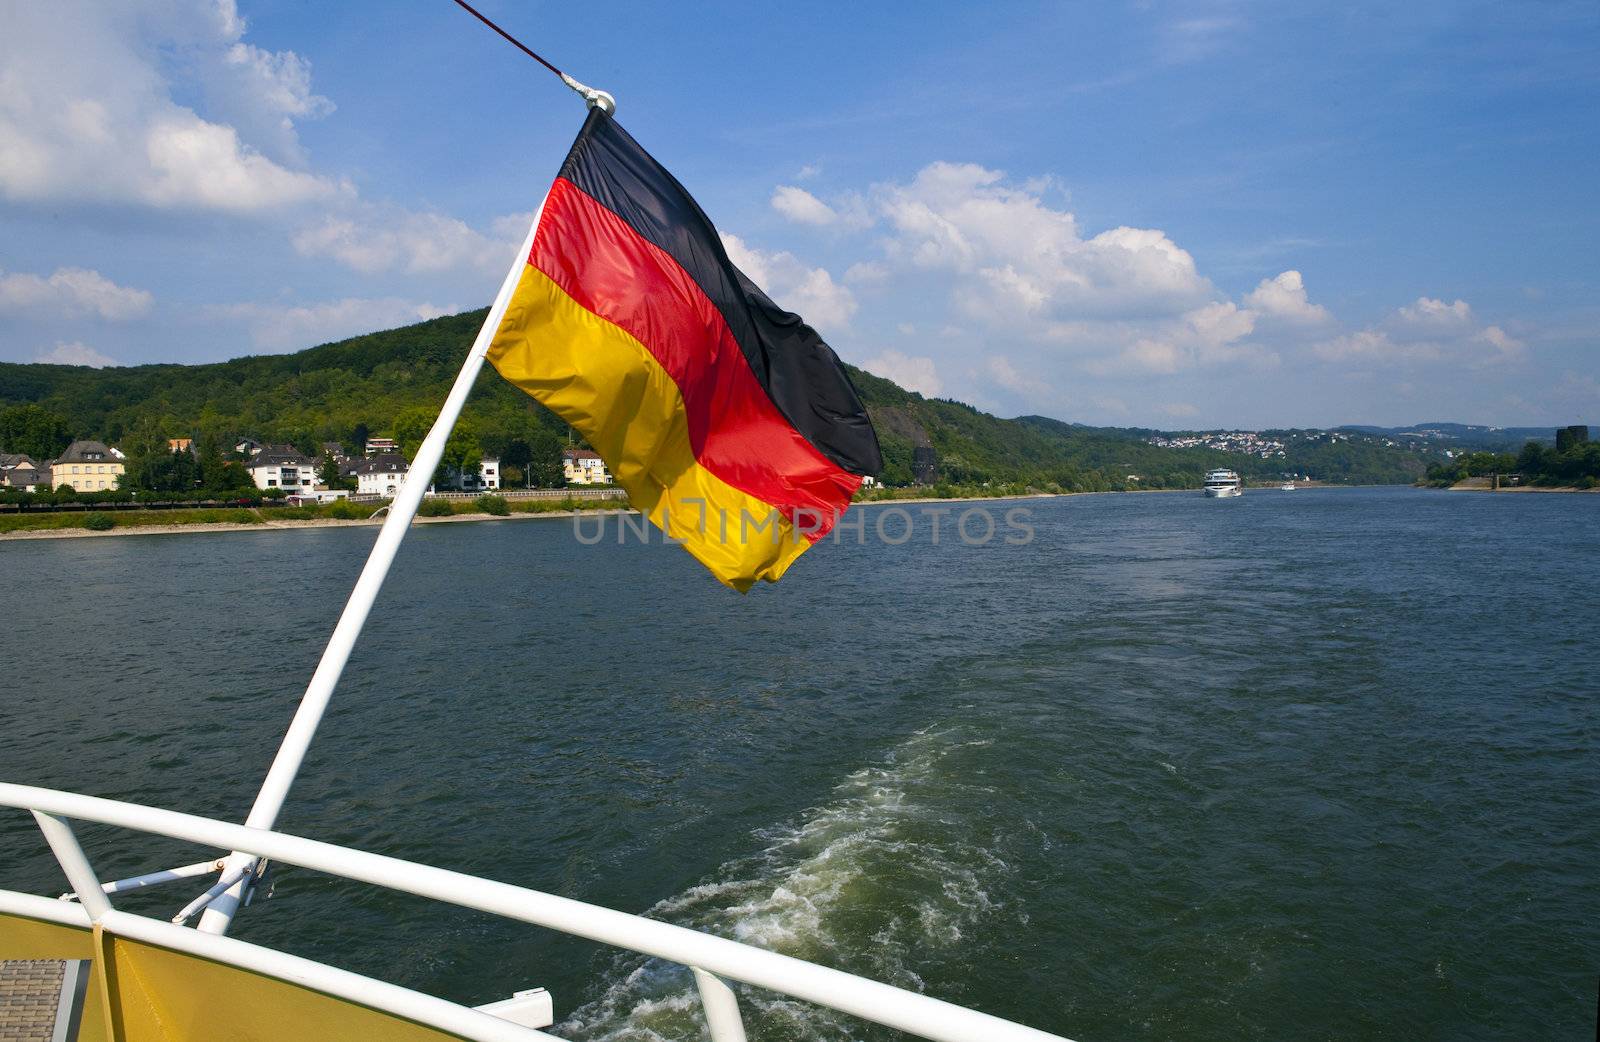 Boat trip taking in the beautiful scenery on the Rhine in Germany.